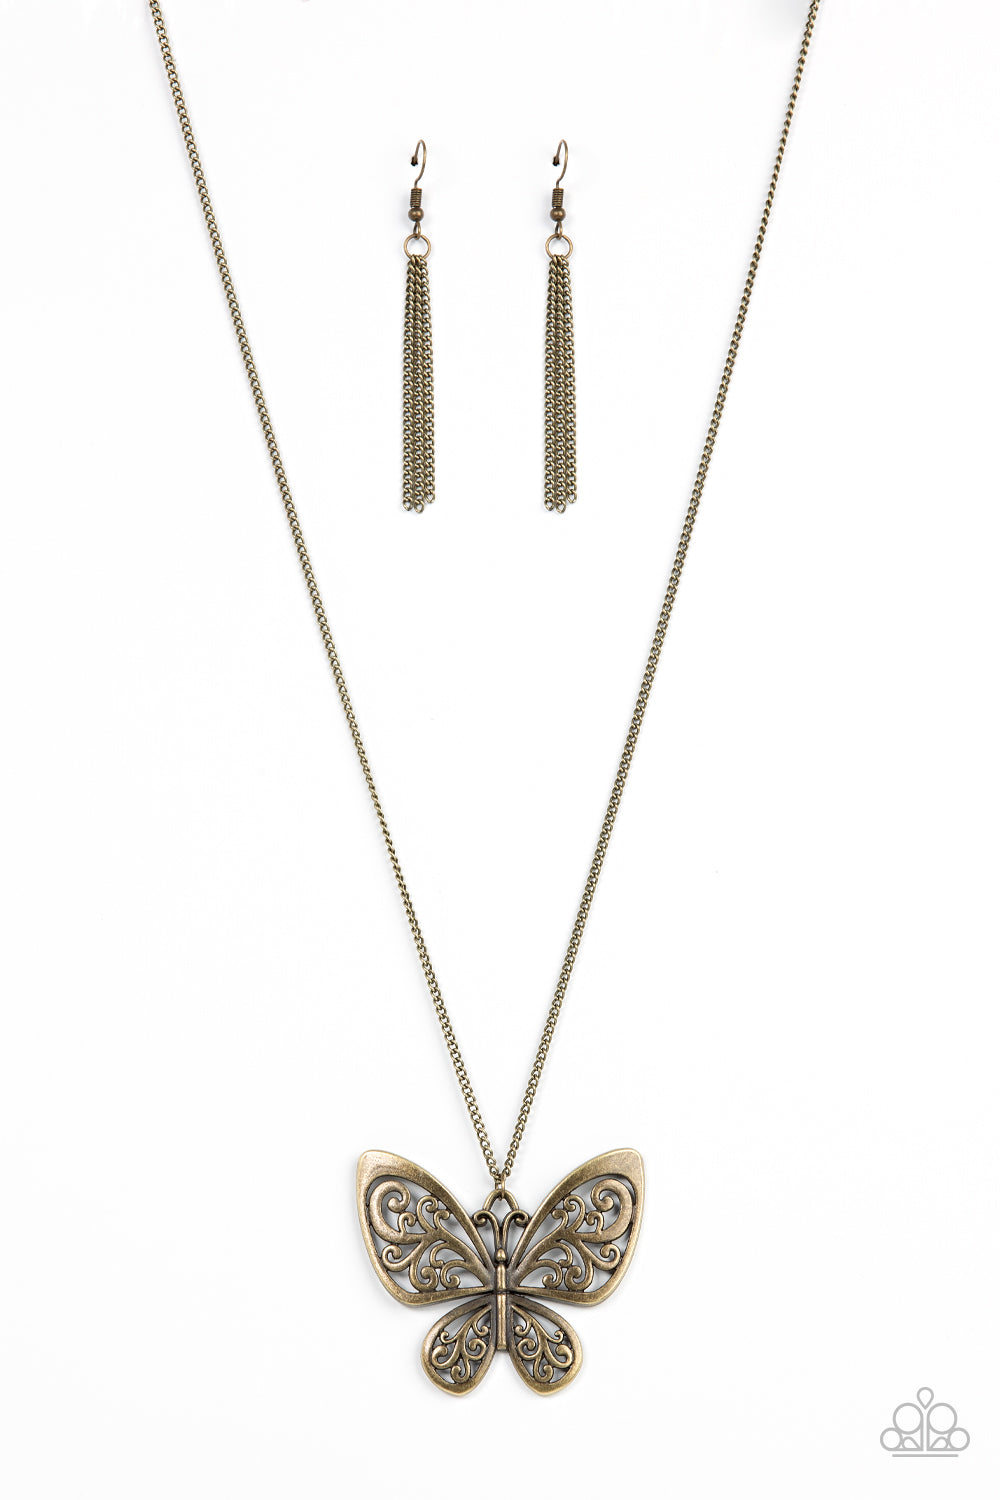 Paparazzi Necklaces - Butterfly Boutique - Brass